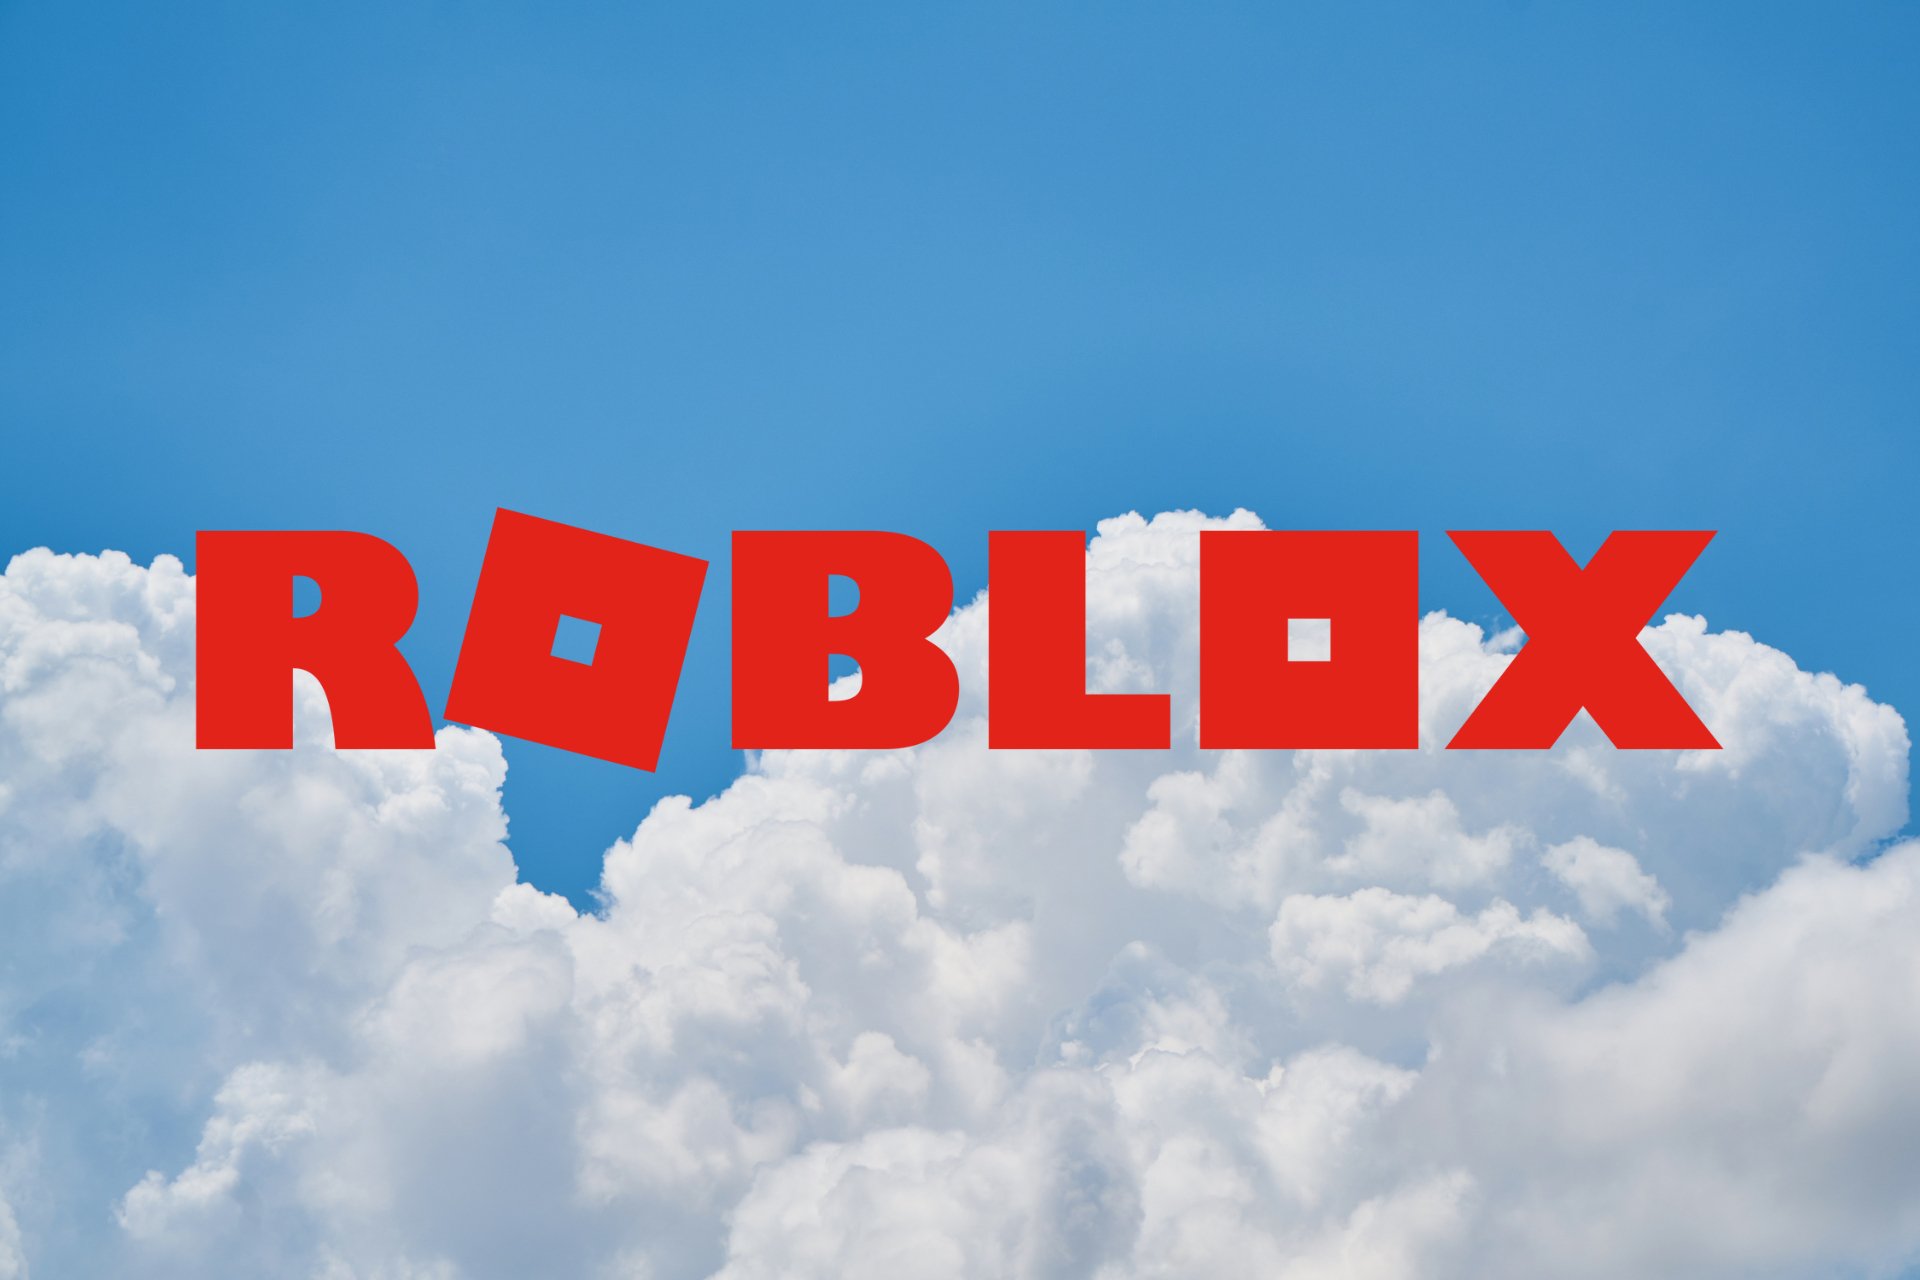 Roblox Error Code 280: Reasons & How To Fix Quickly